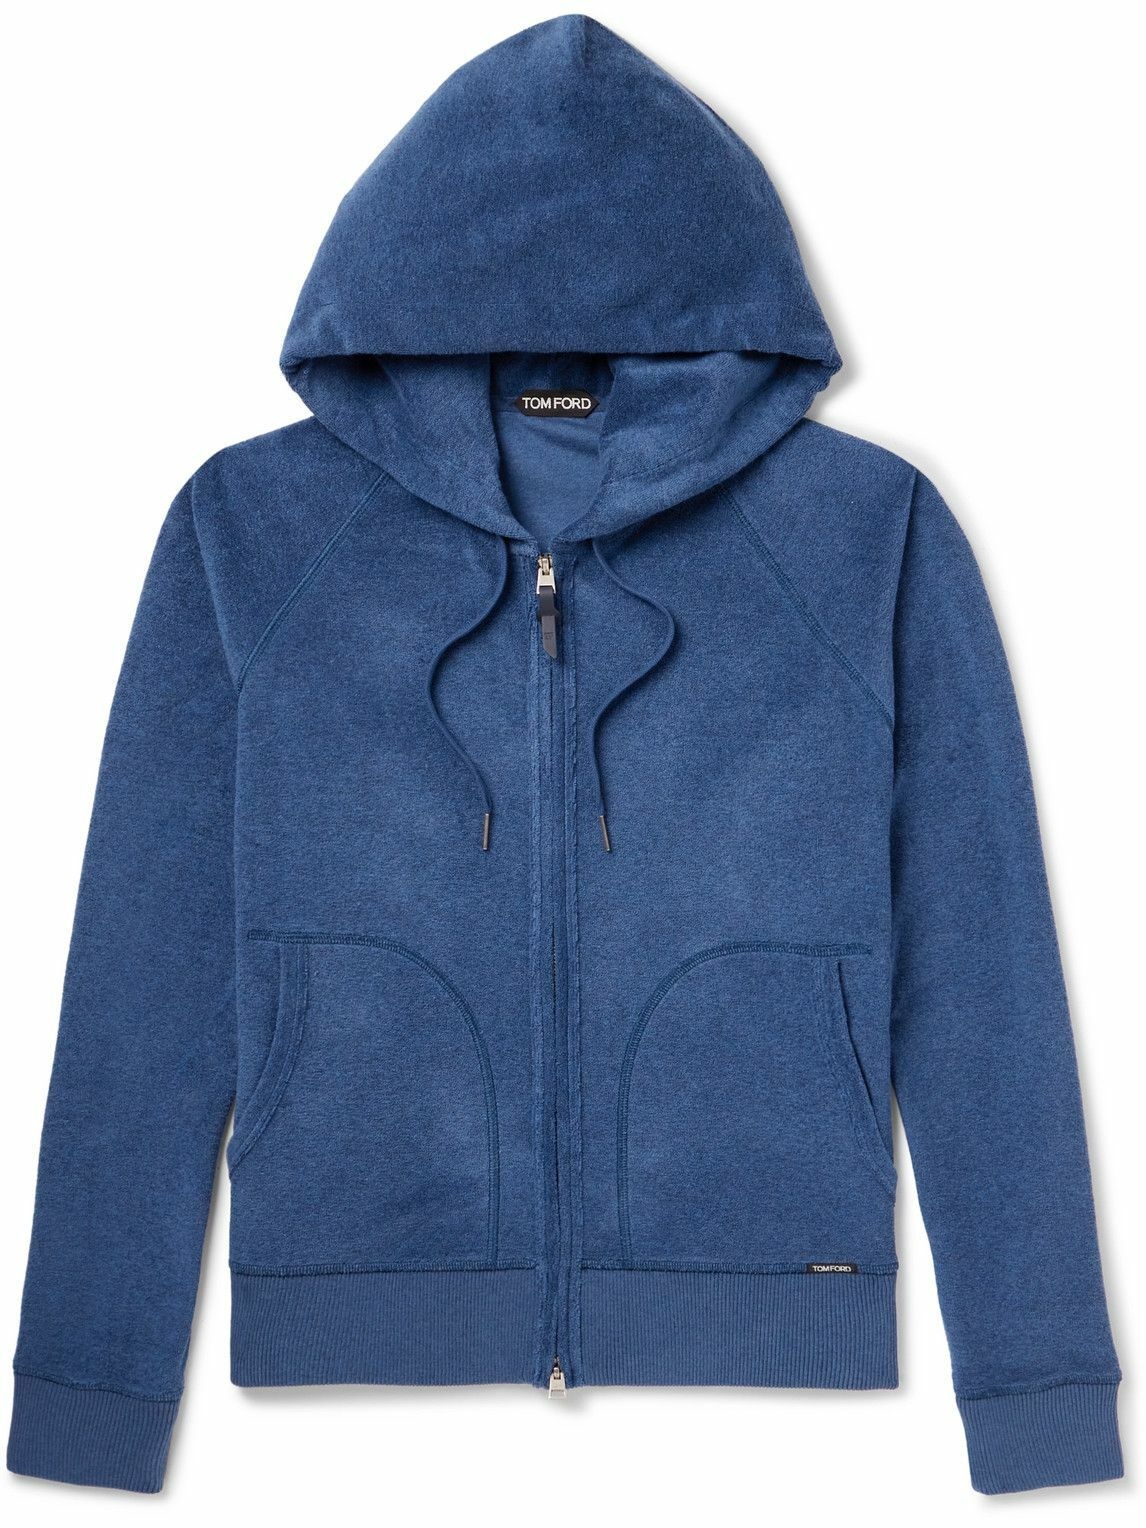 TOM FORD - Cotton-Terry Zip-Up Hoodie - Blue TOM FORD